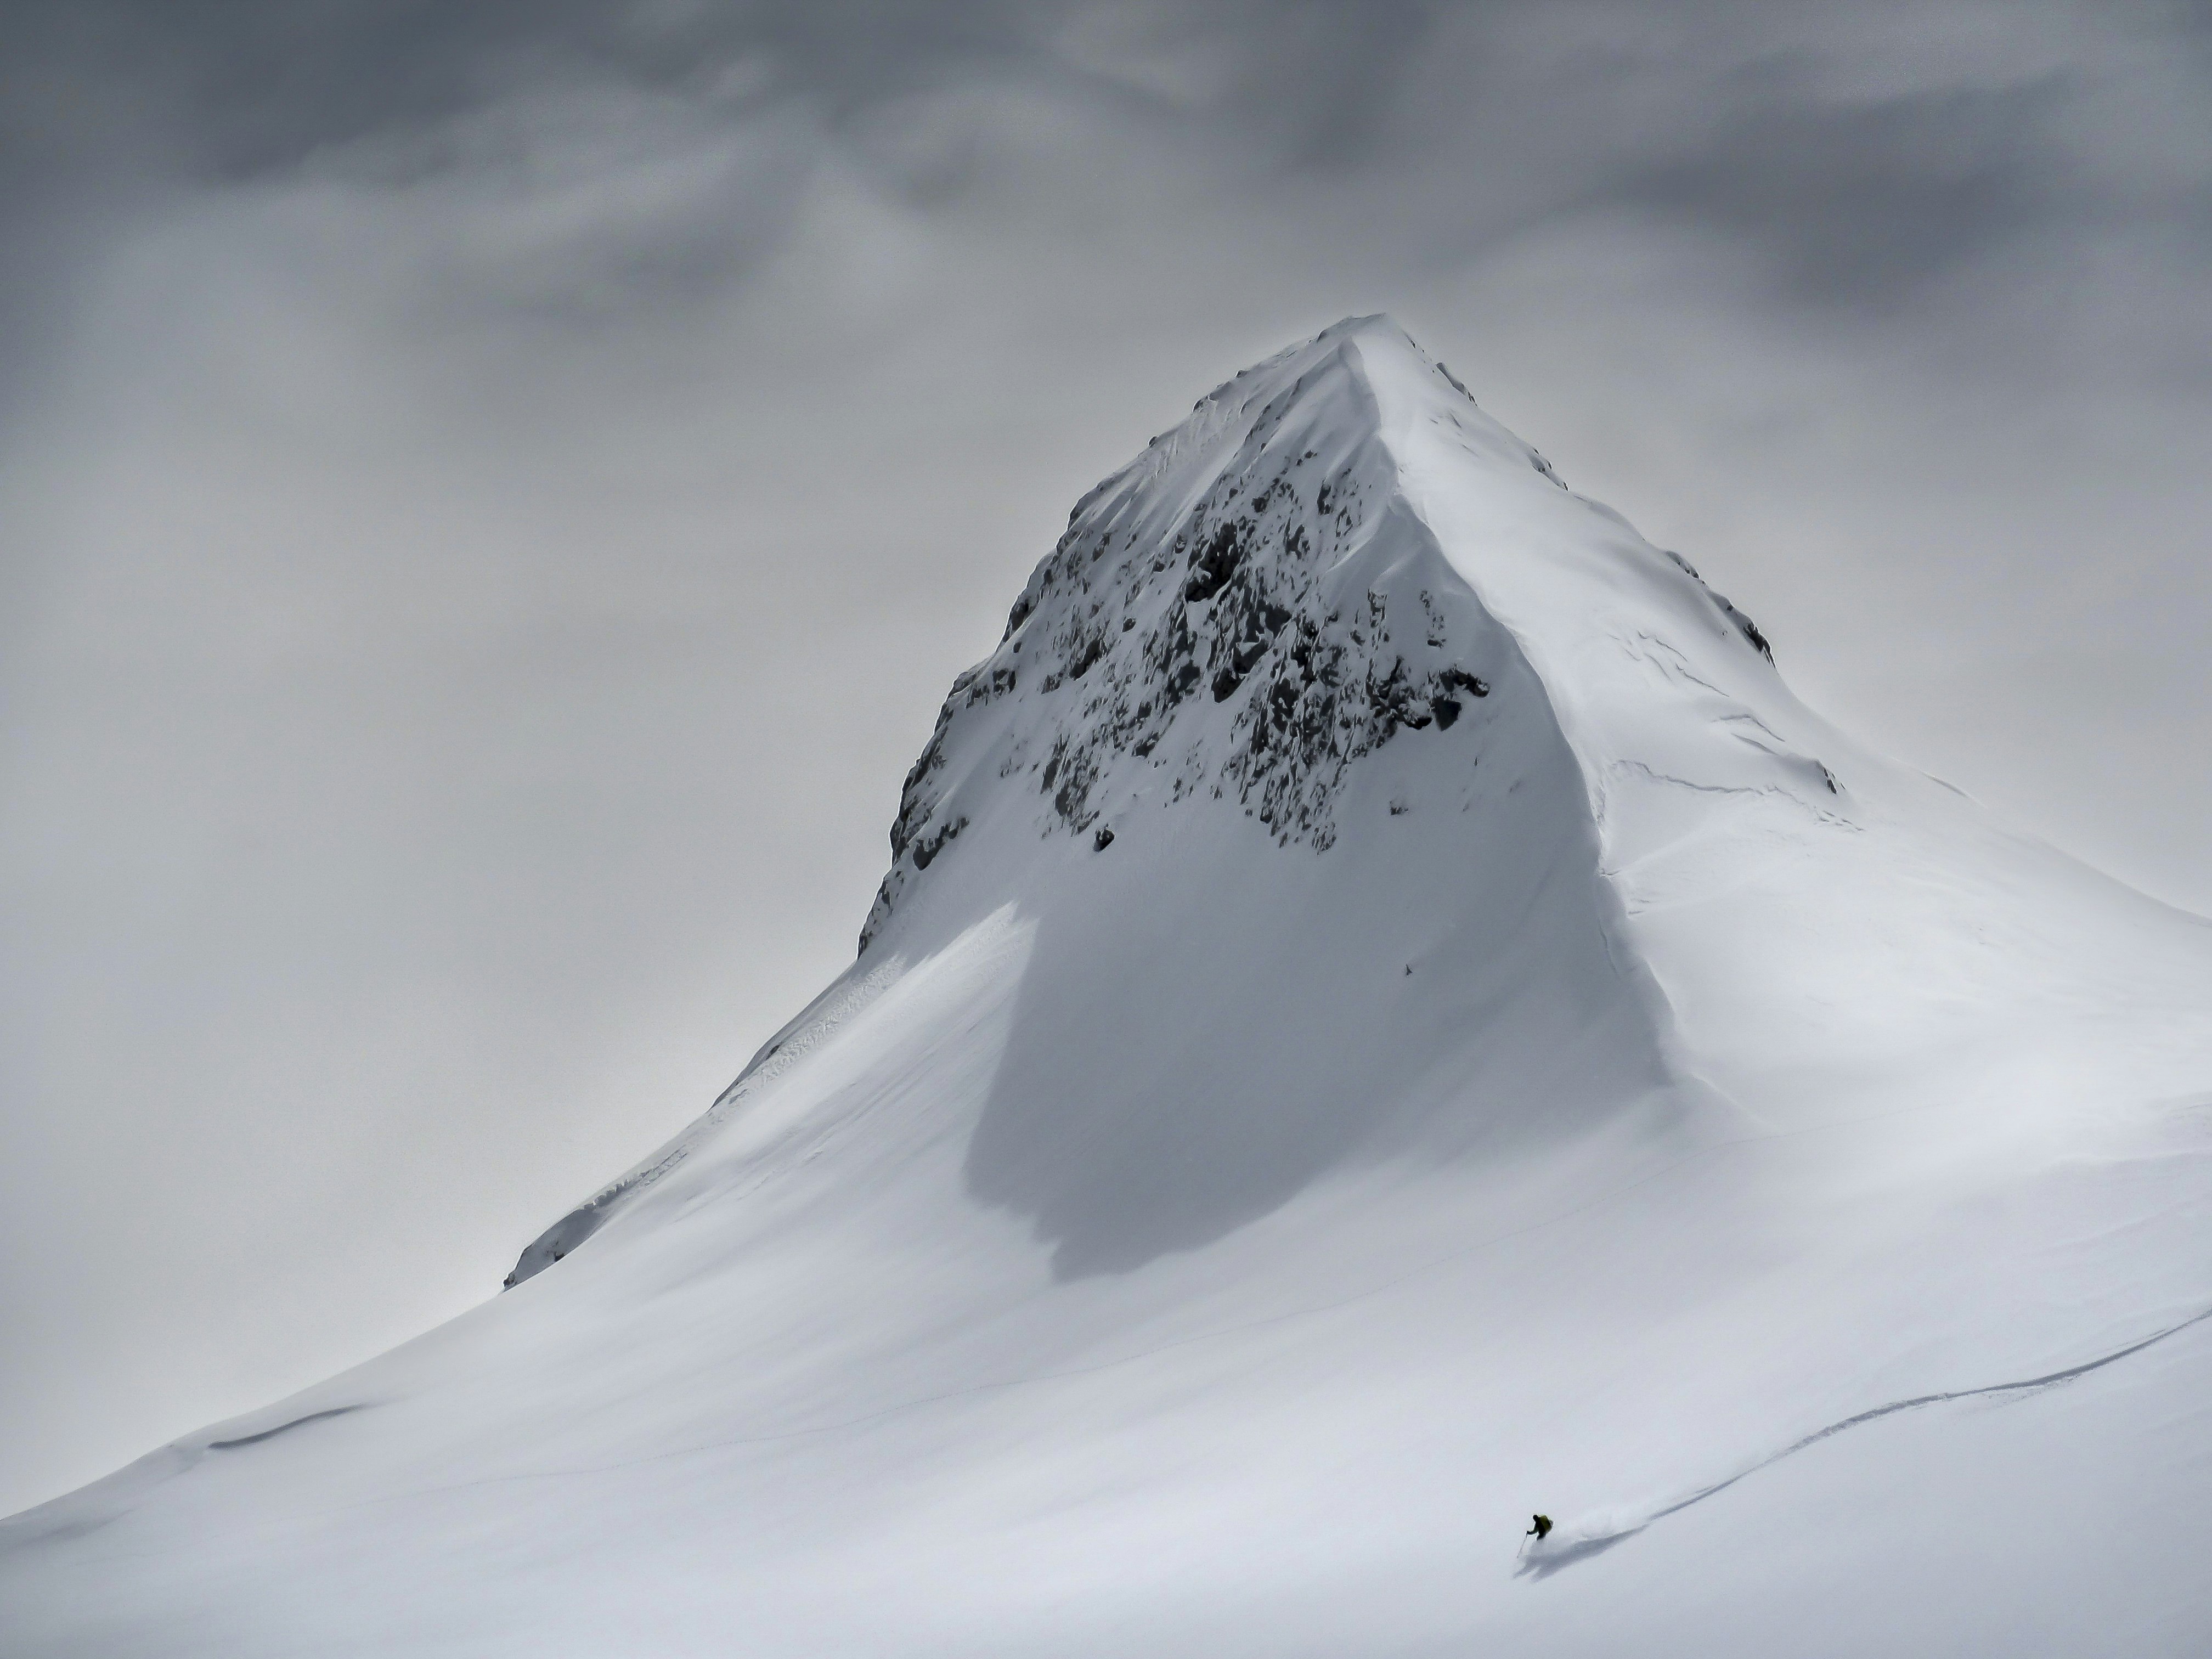 A picture of a lone skier speeding down the slope of a Slovenian alpine peak